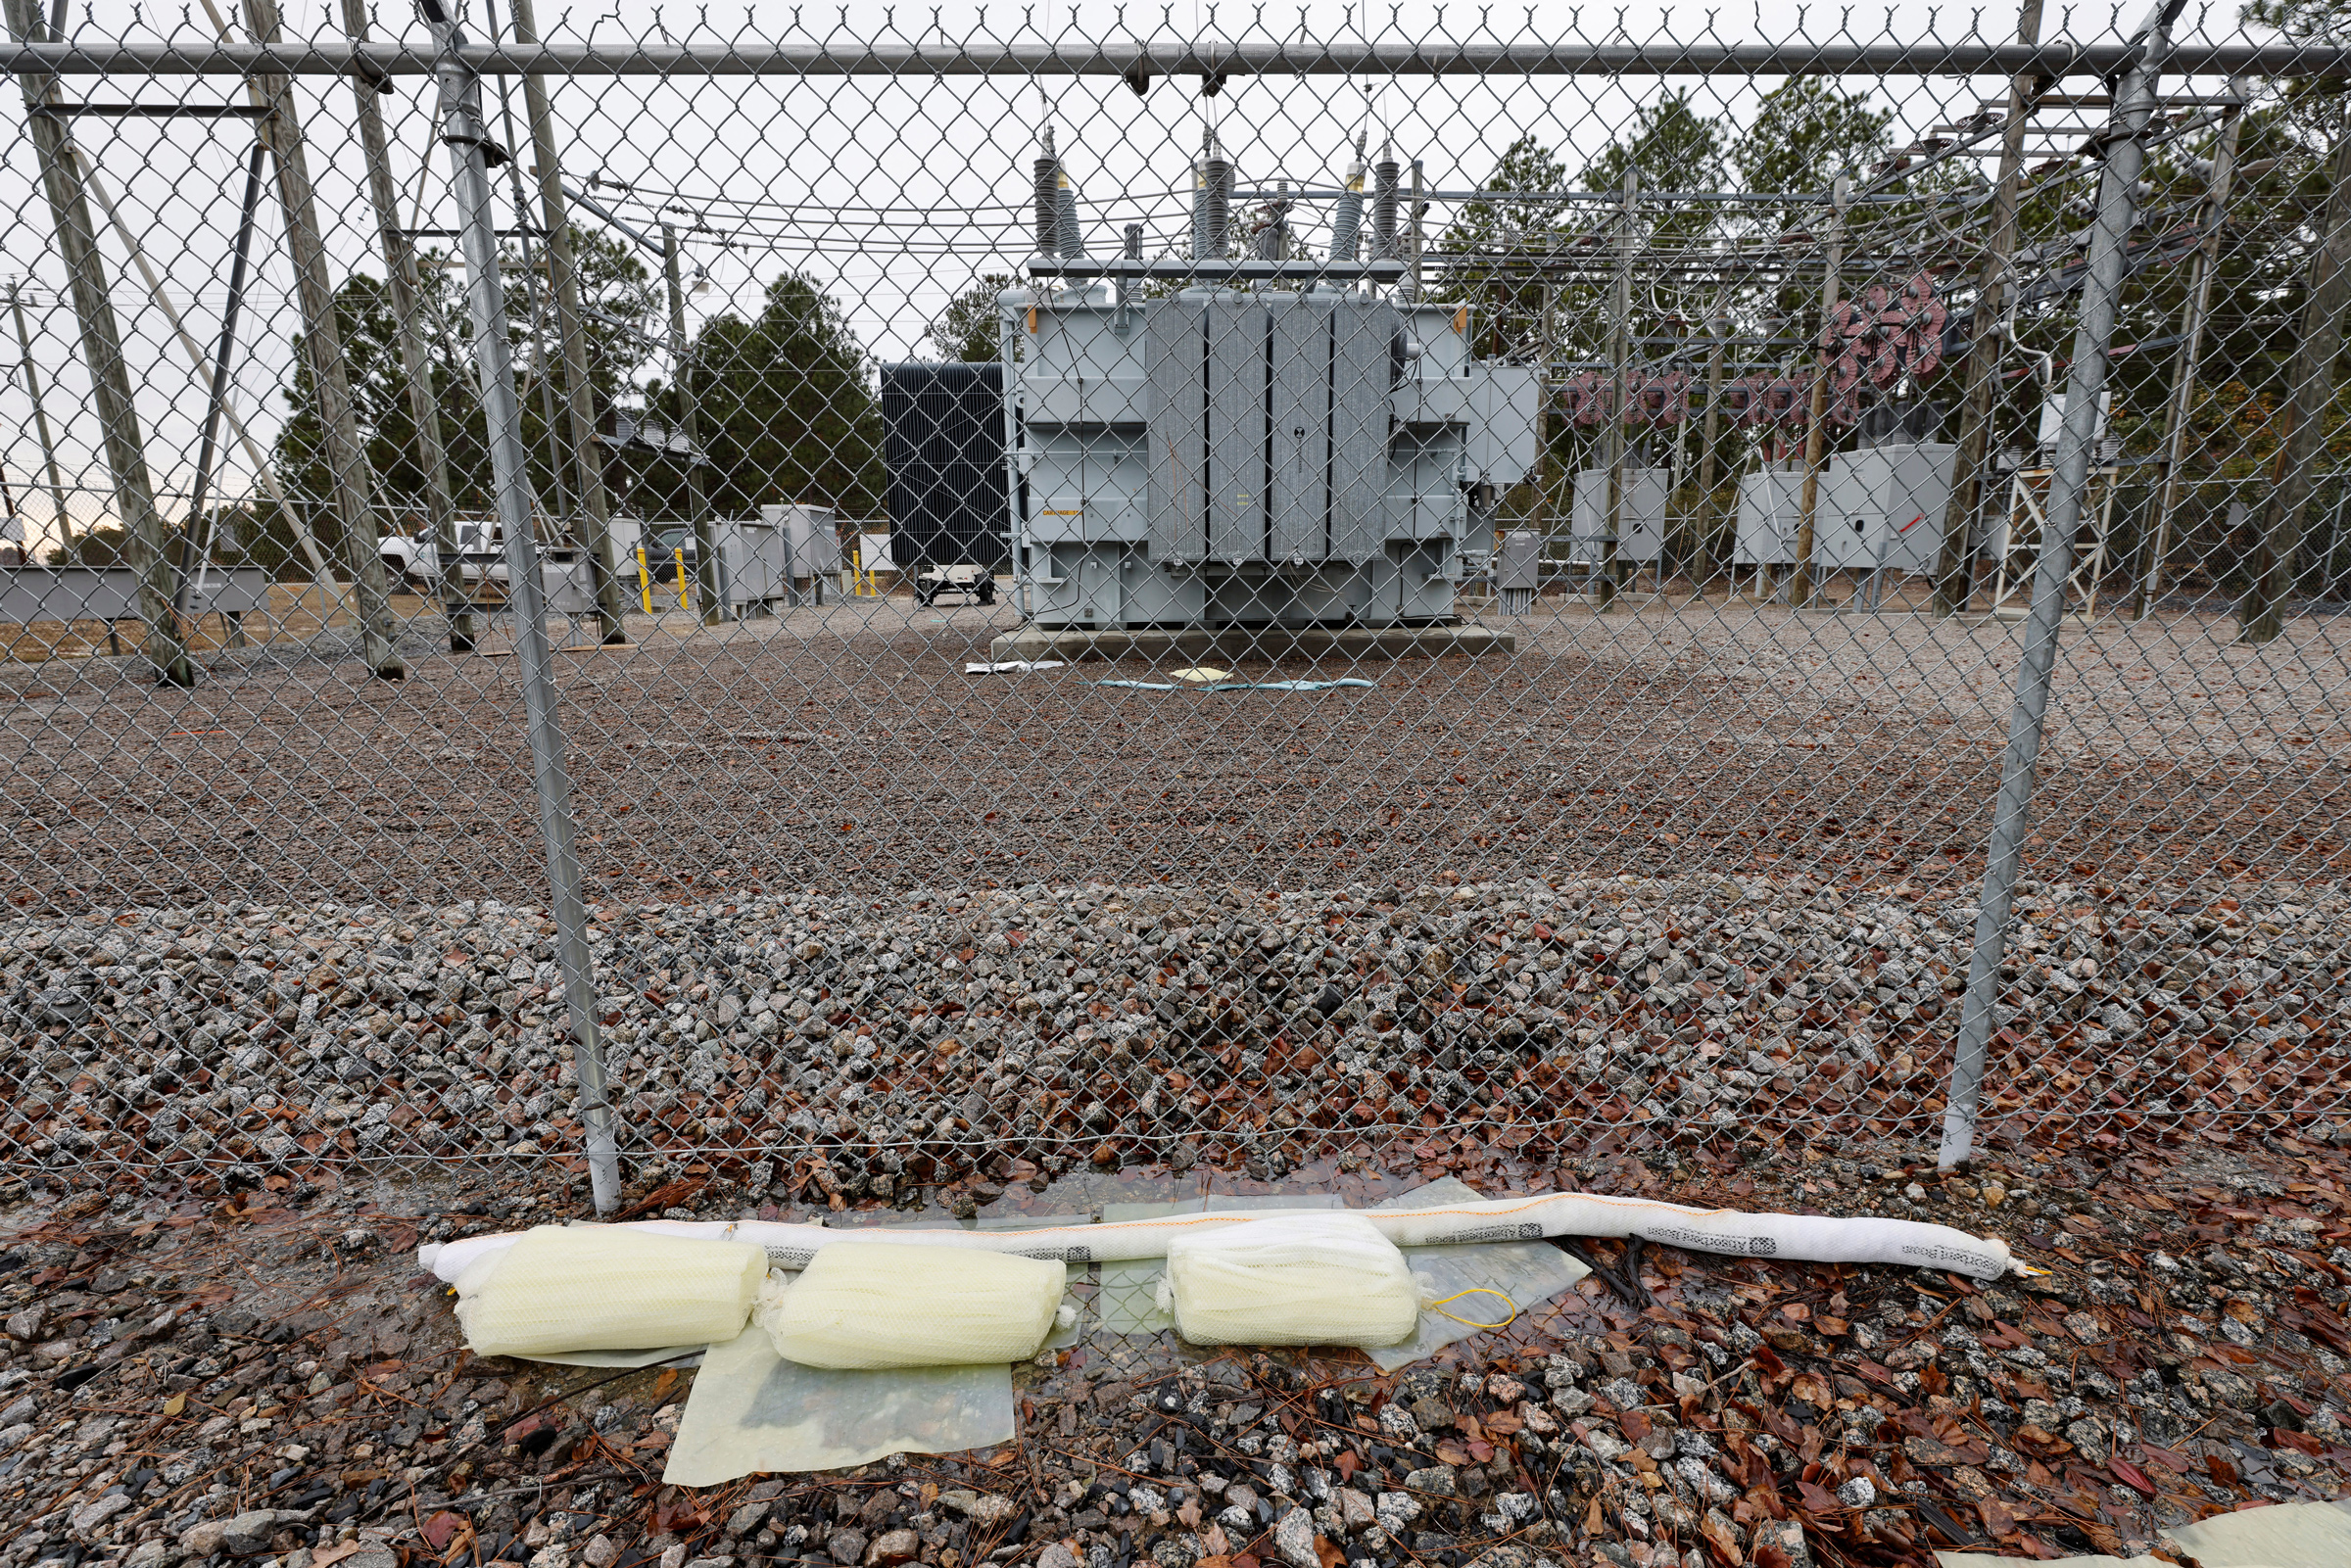 Vandalism suspected in mass power outage in North Carolina